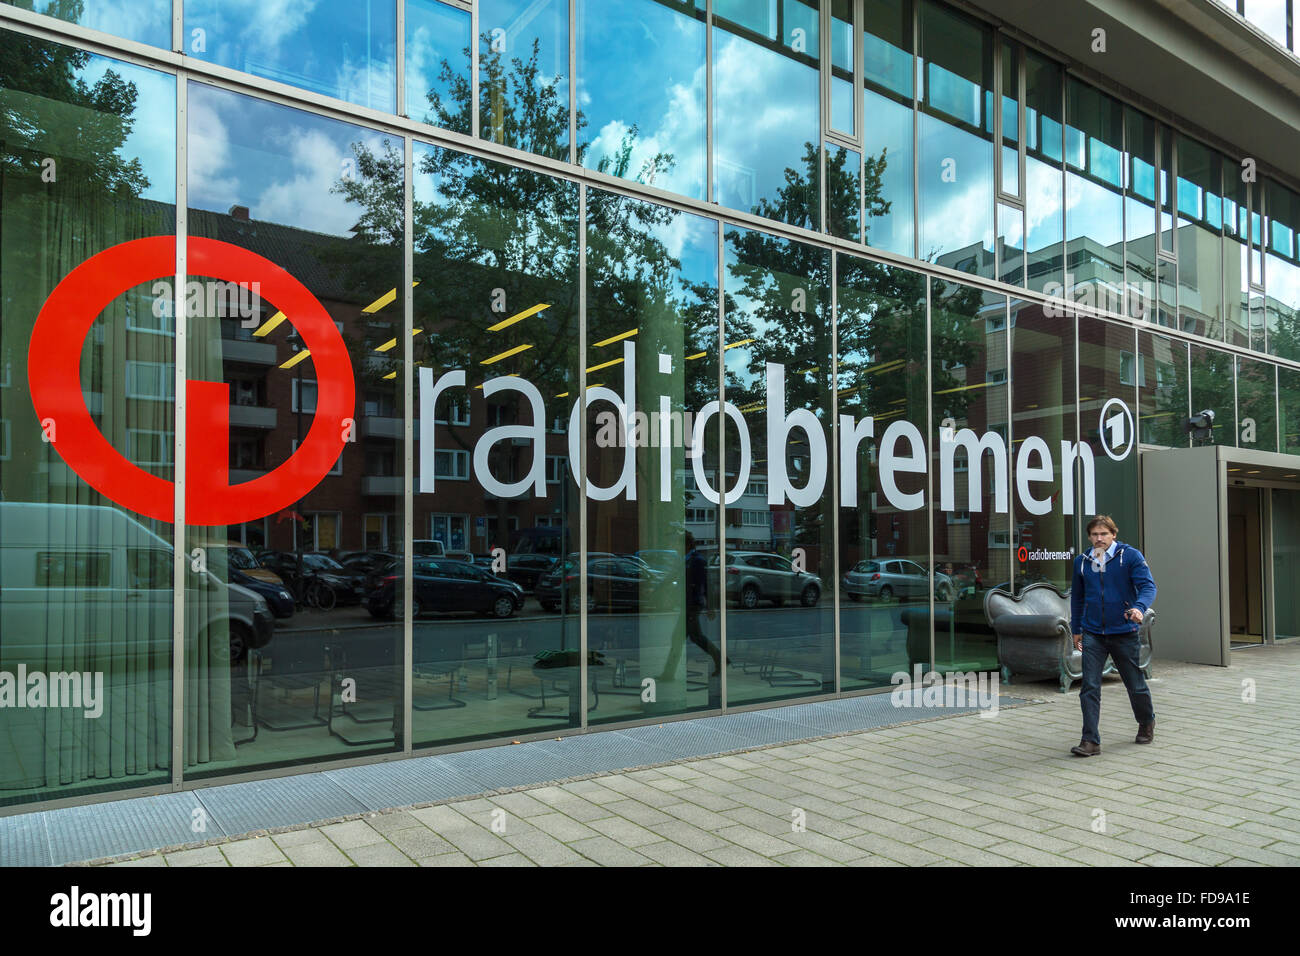 Radio bremen hi-res stock photography and images - Alamy